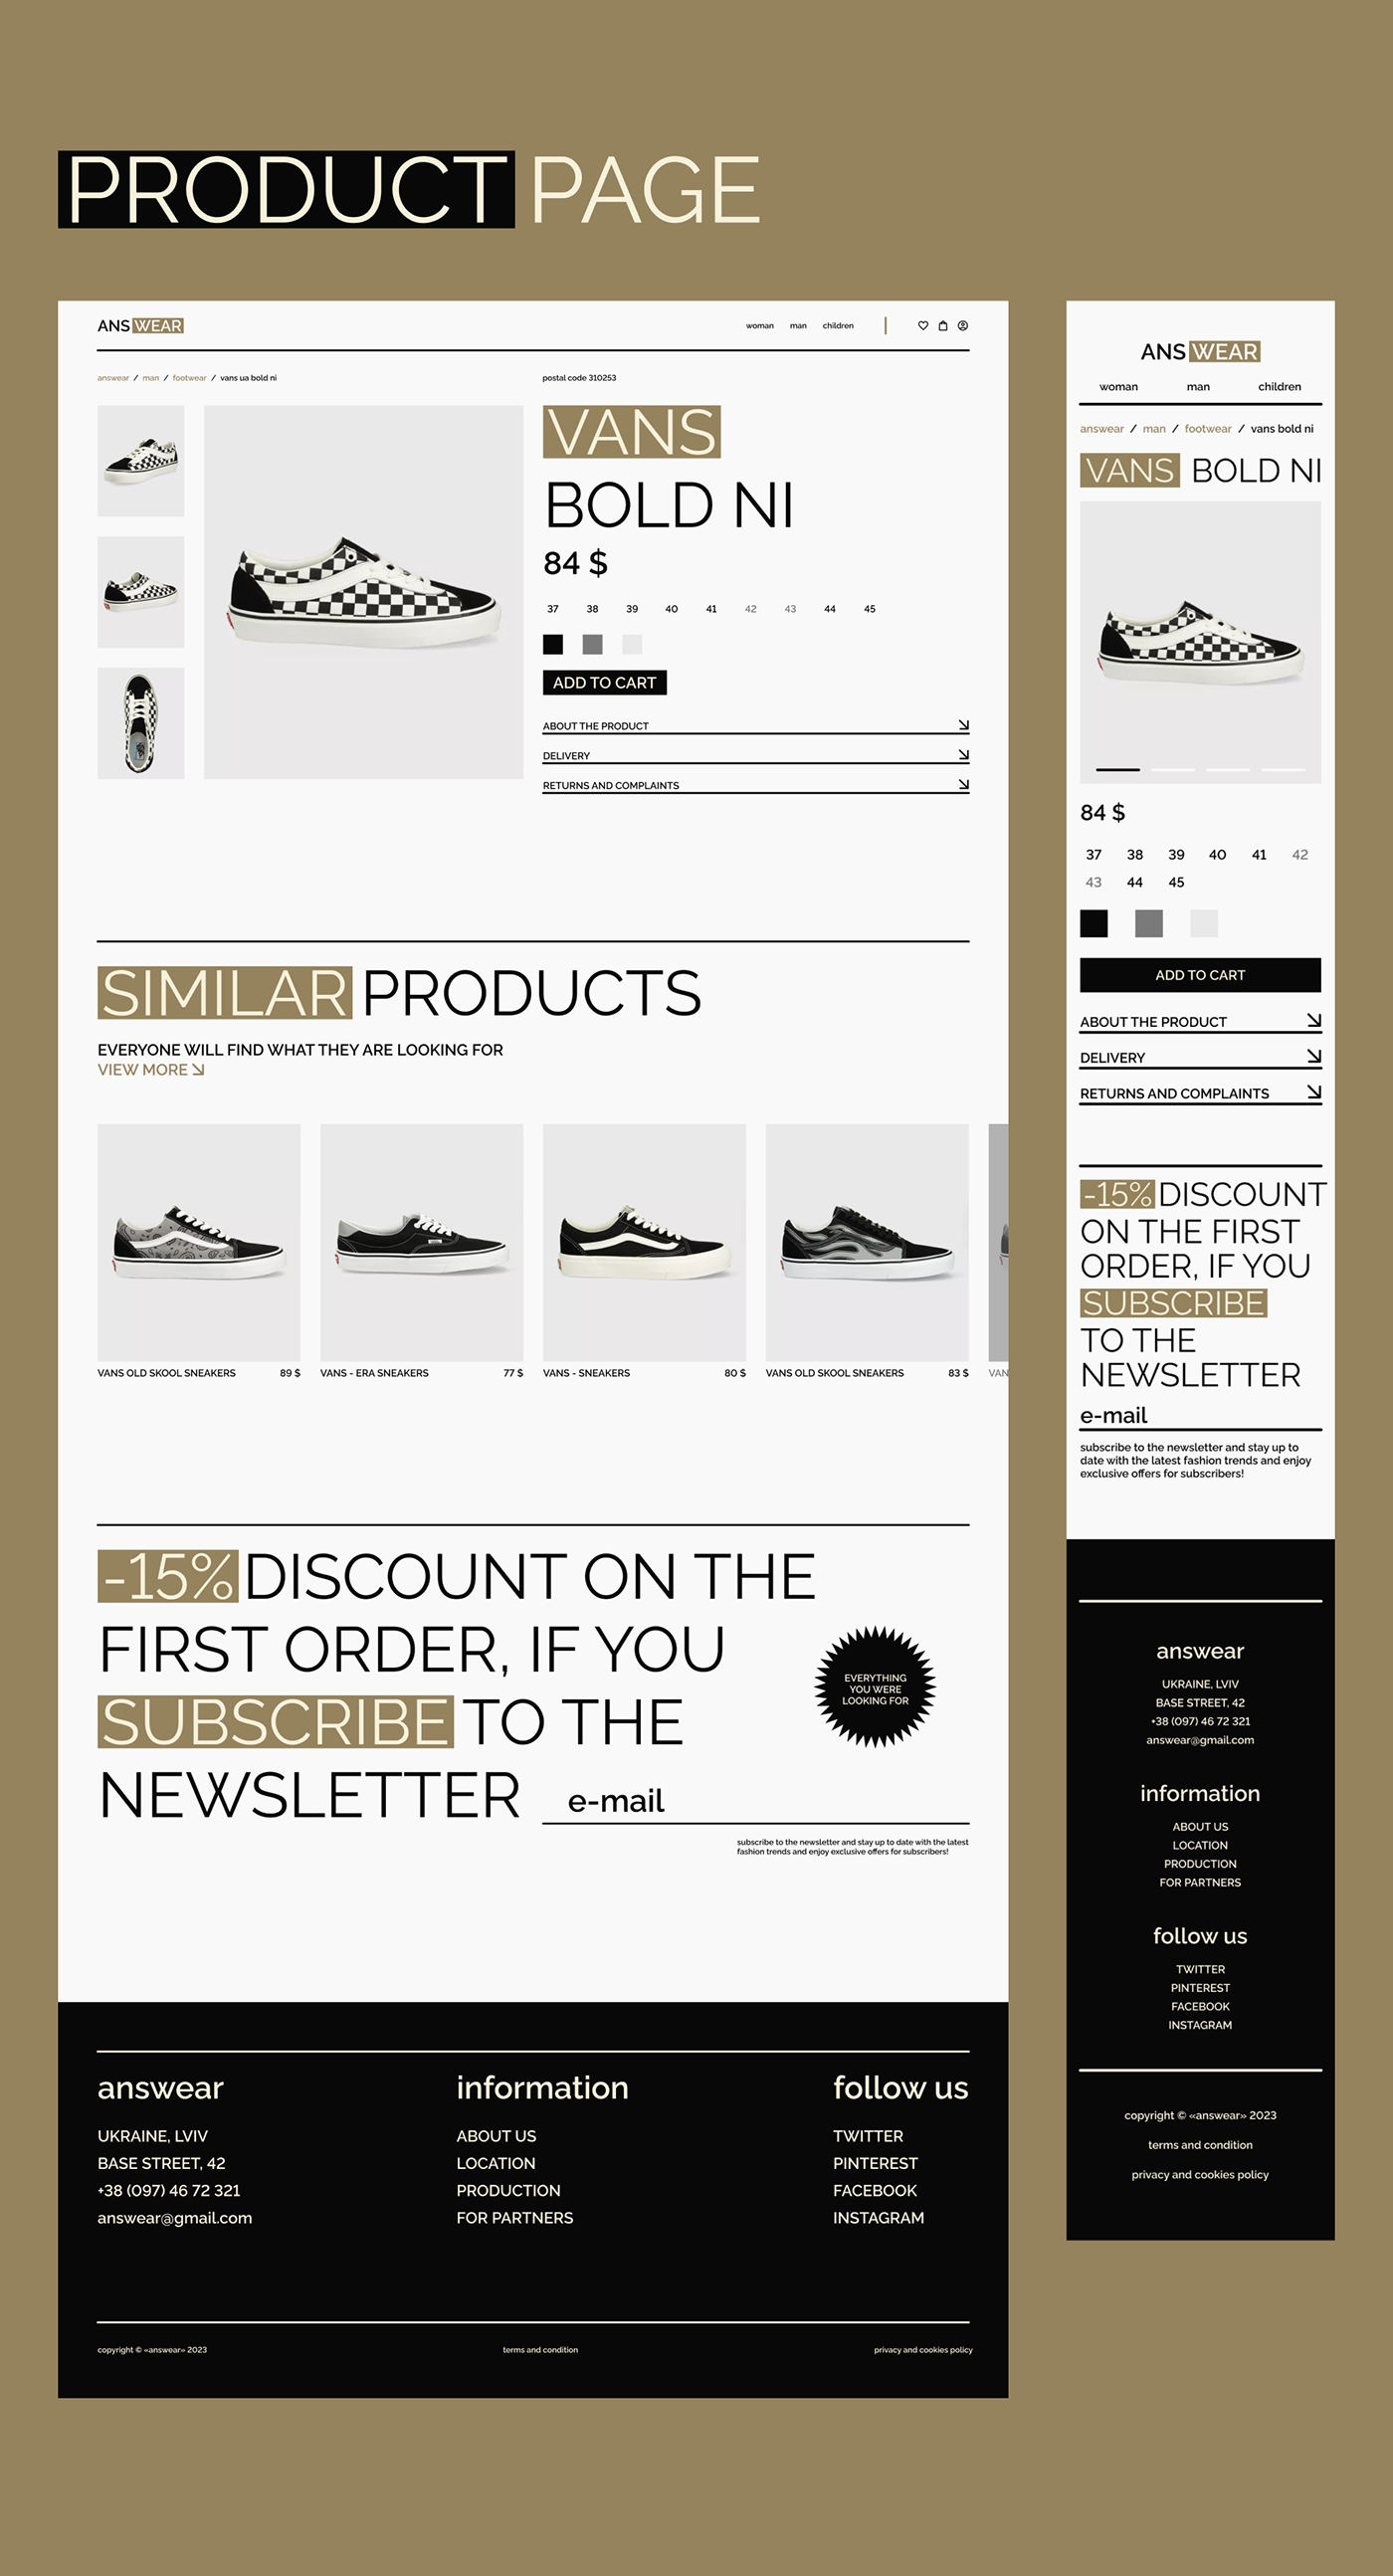 boutique design Figma redesign text text heavy typography   UI/UX Web Design  Website